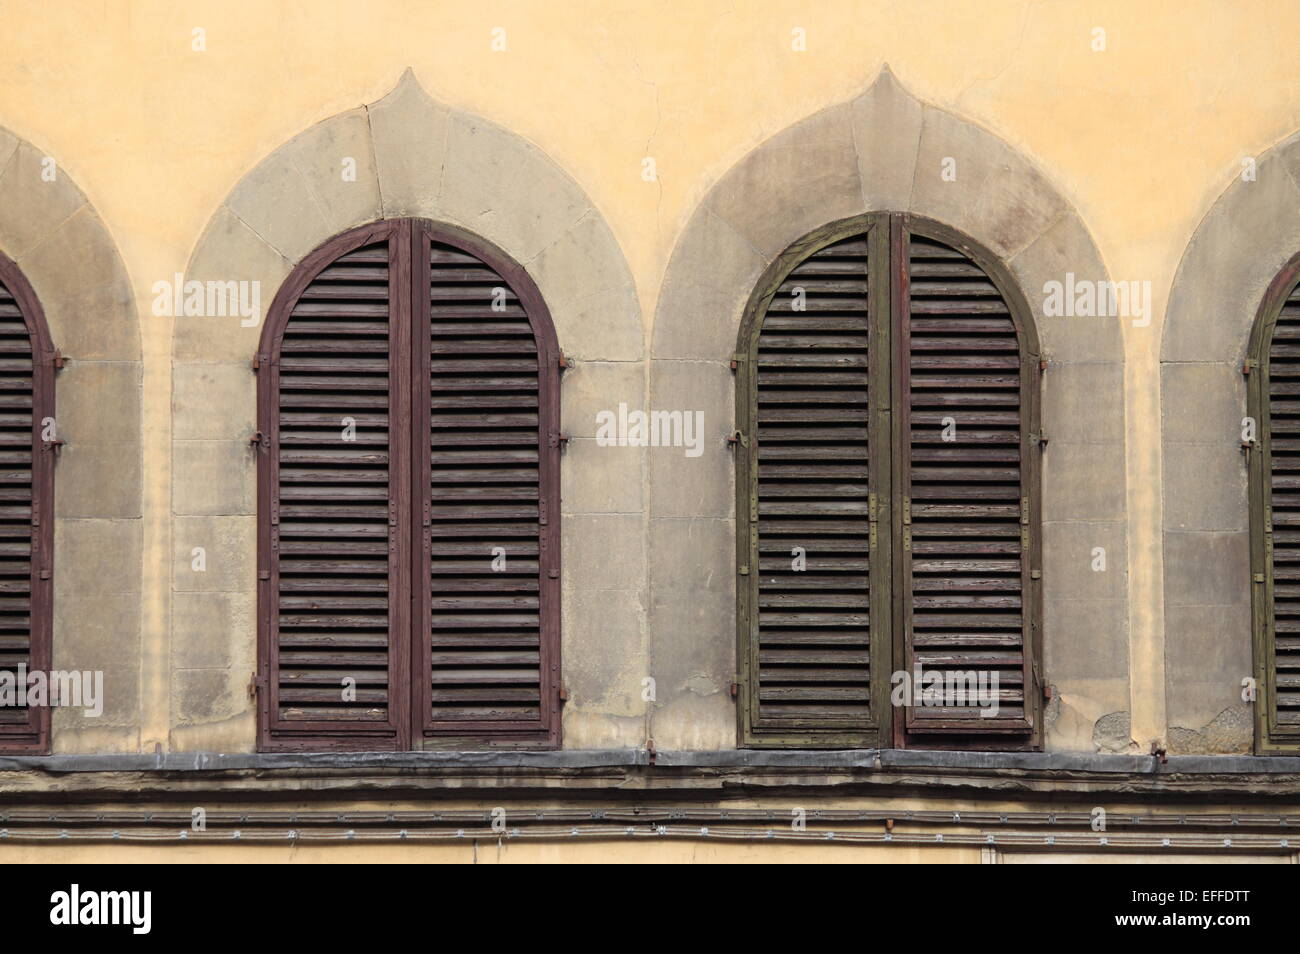 Arched windows with closed shutters Stock Photo